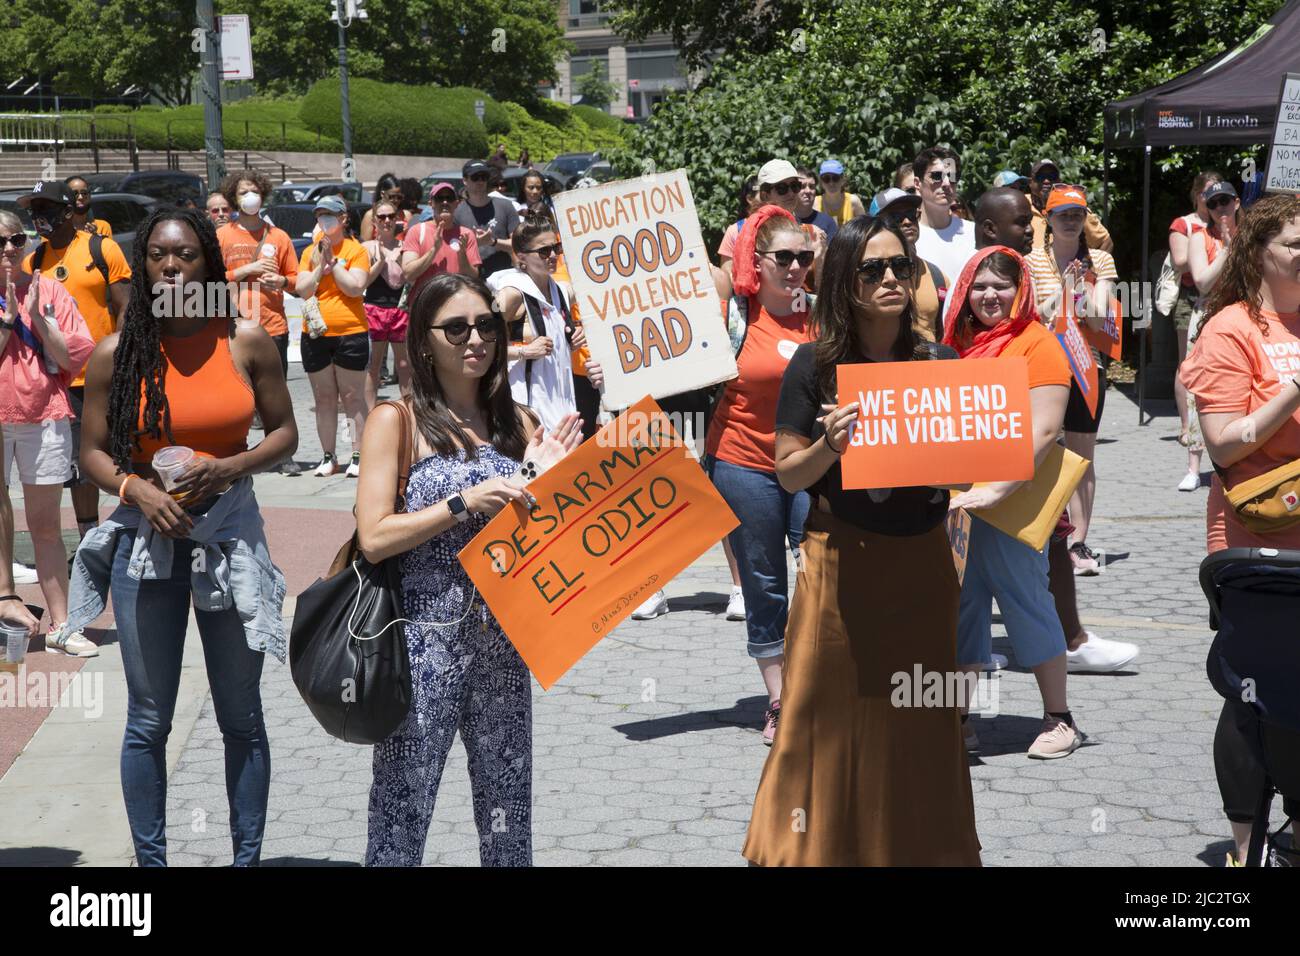 Moms Demand Action  NYC commemorate Wear Orange with its Annual rally & Walk for gun law reform  in Solidarity with Survivors from gun violence from Foley Square in lower Manhattan across the Brooklyn Bridge. Stock Photo